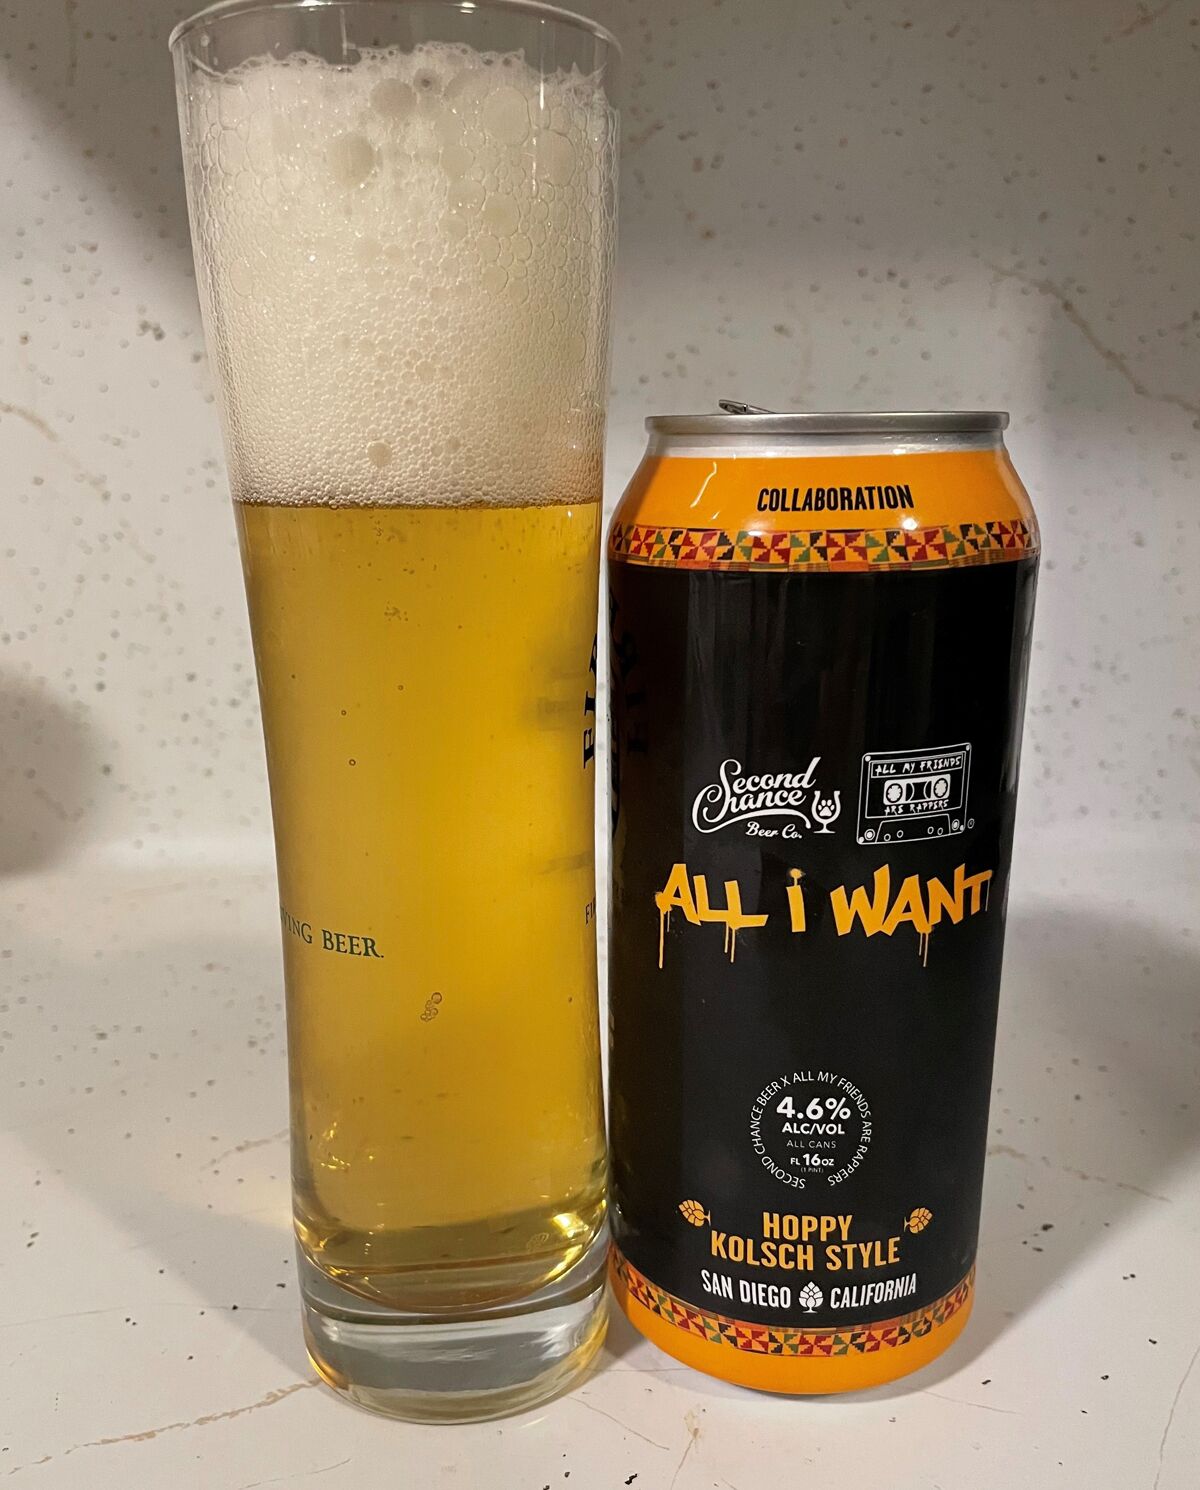 All I Want beer from Second Chance Brewing.